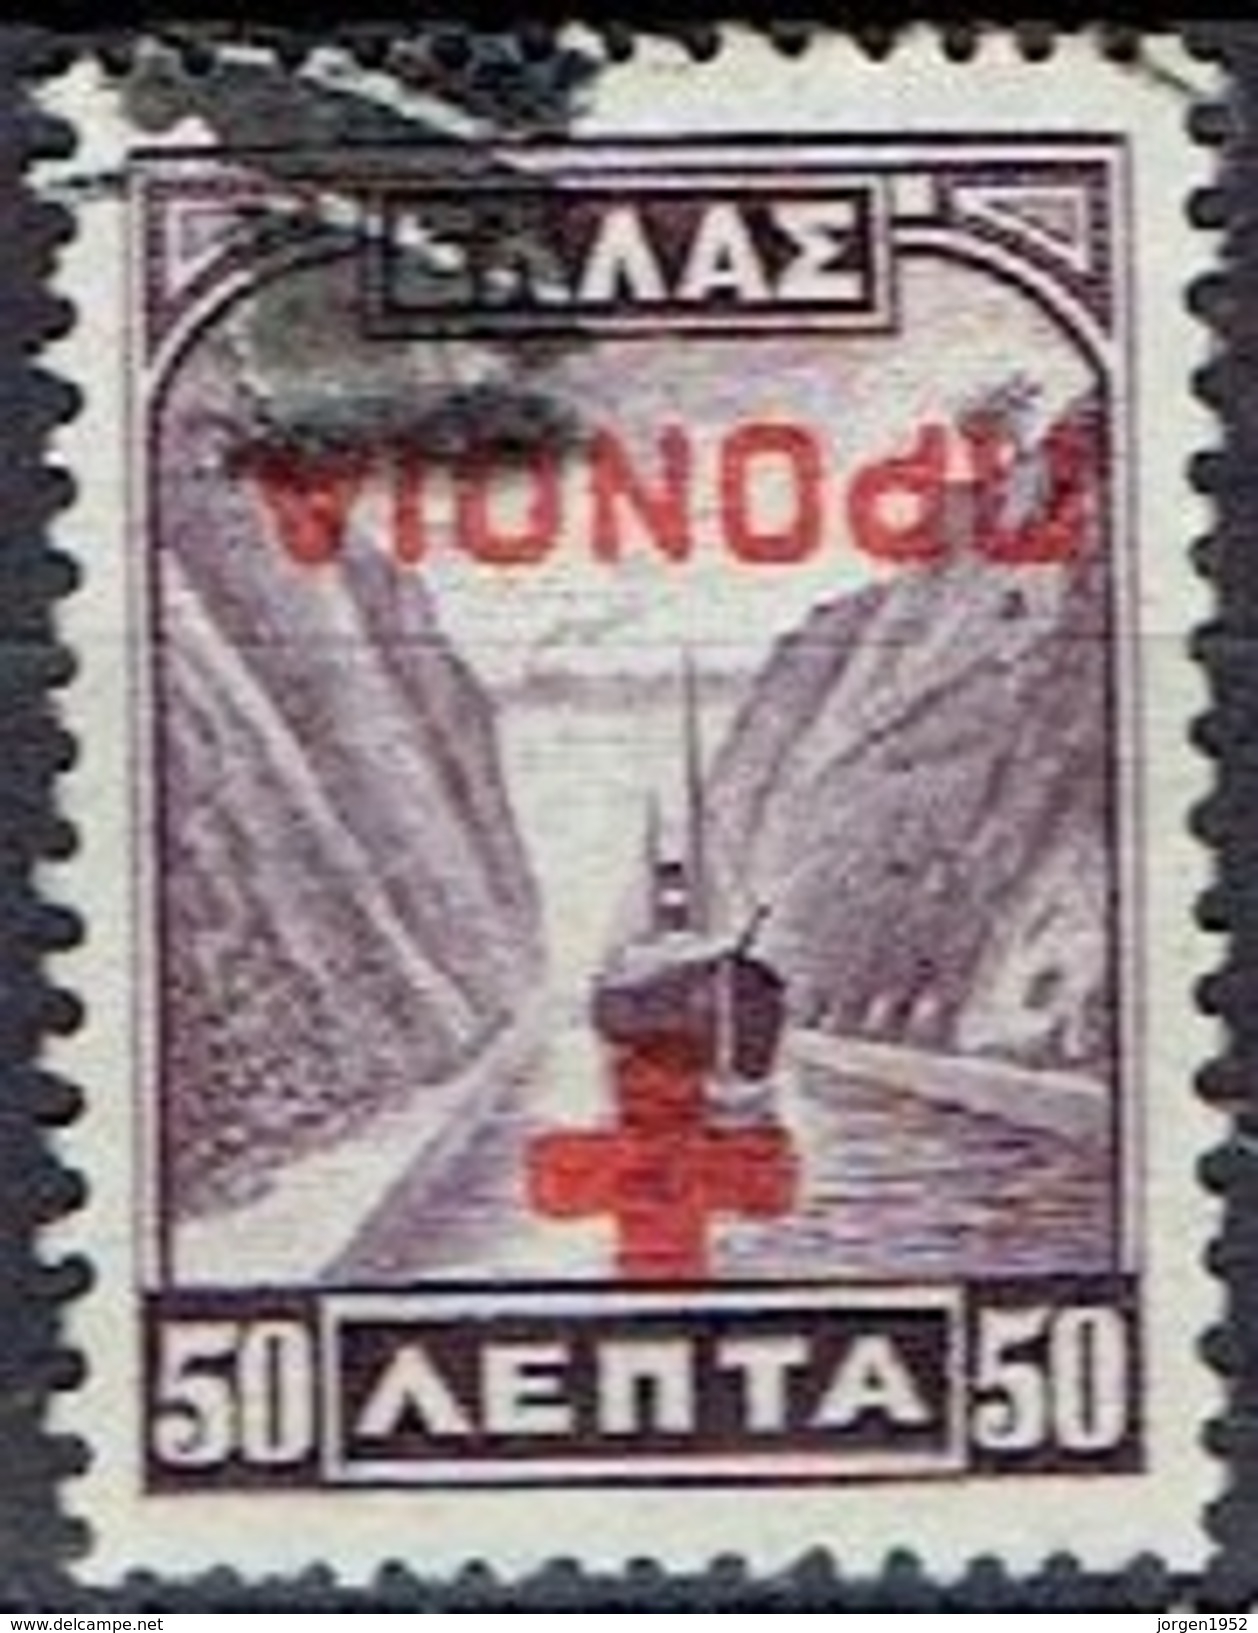 GREECE # SOCIAL WELFARE STAMPS FROM 1938 - Résistance Nationale